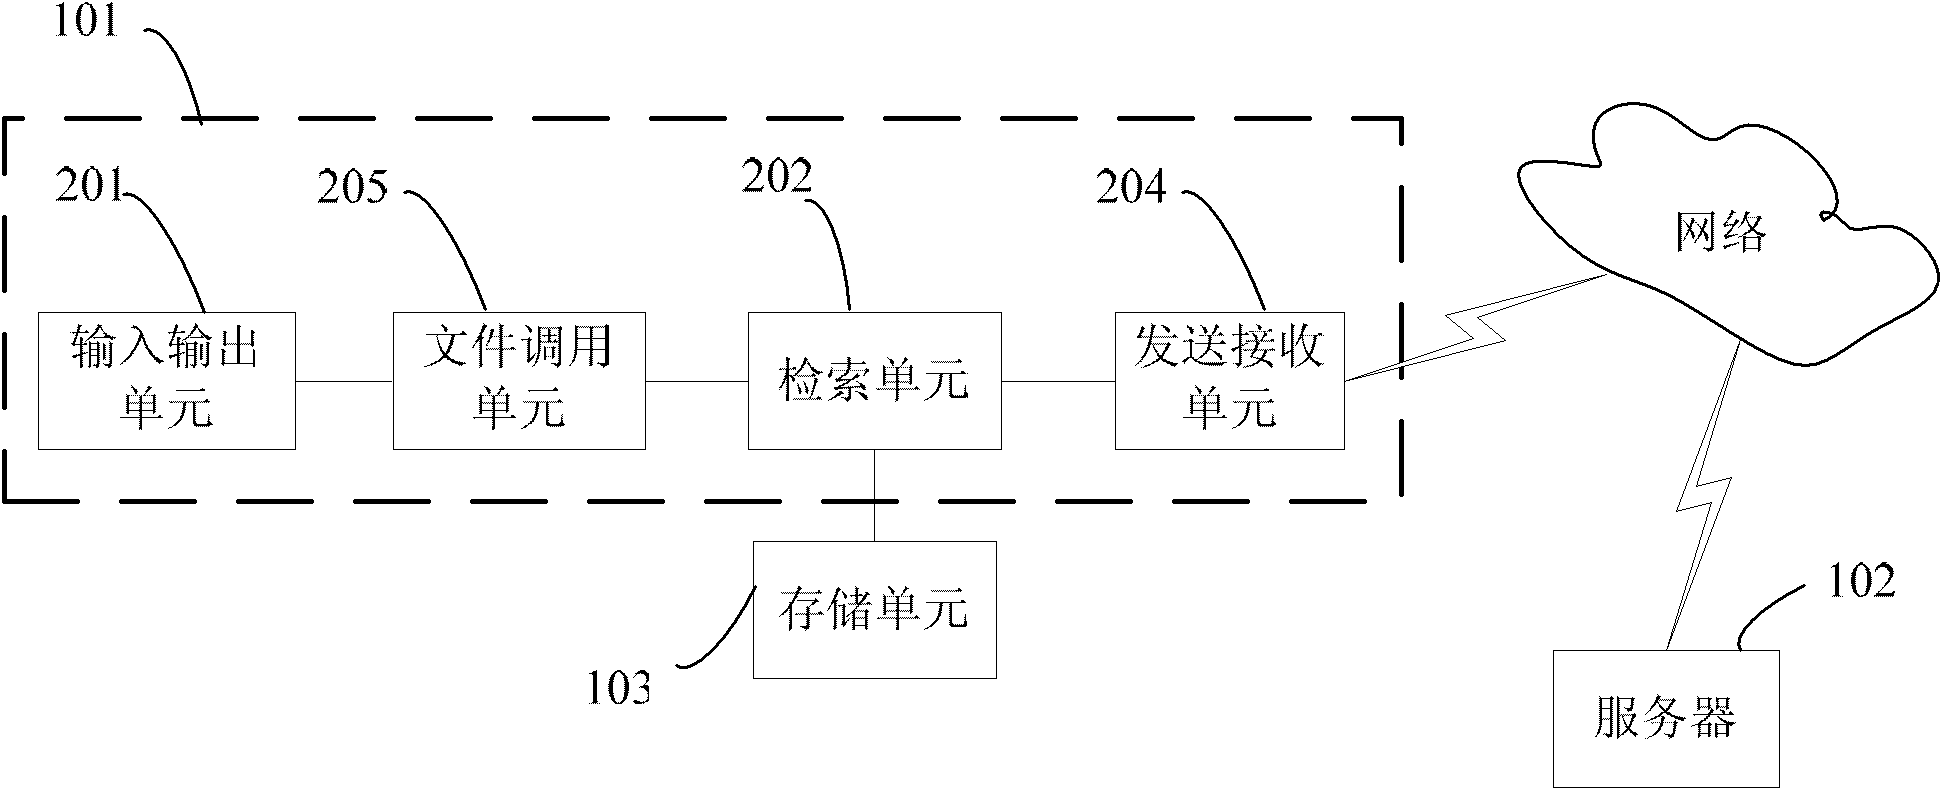 Music media information acquisition method and vehicle-mounted terminal